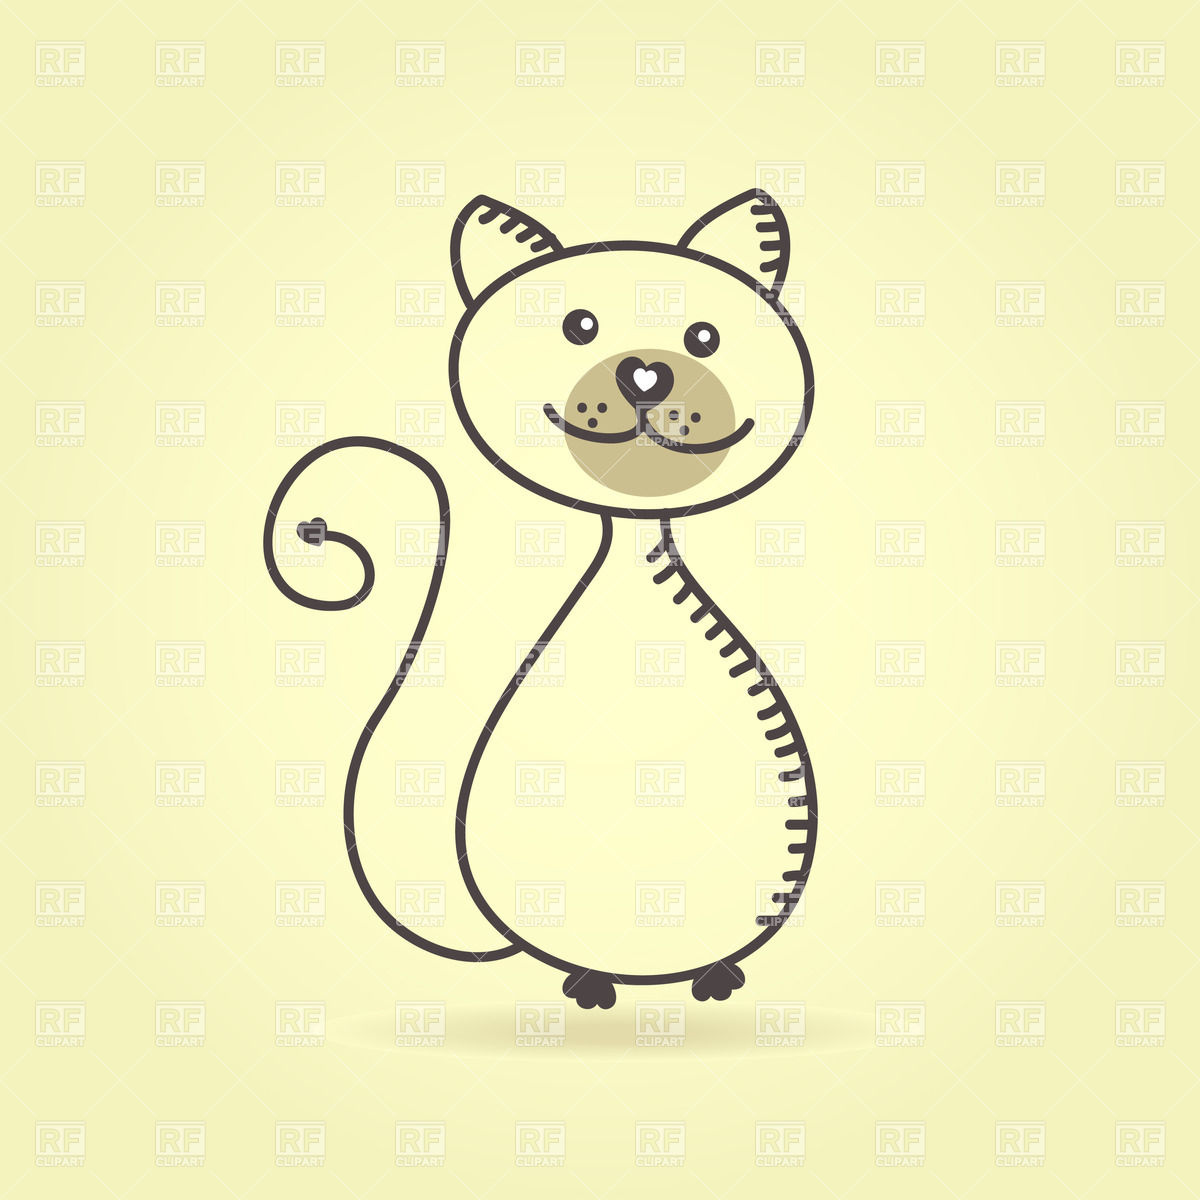 Funny Cat Cartoon 27802 Icons And Emblems Download Royalty Free    